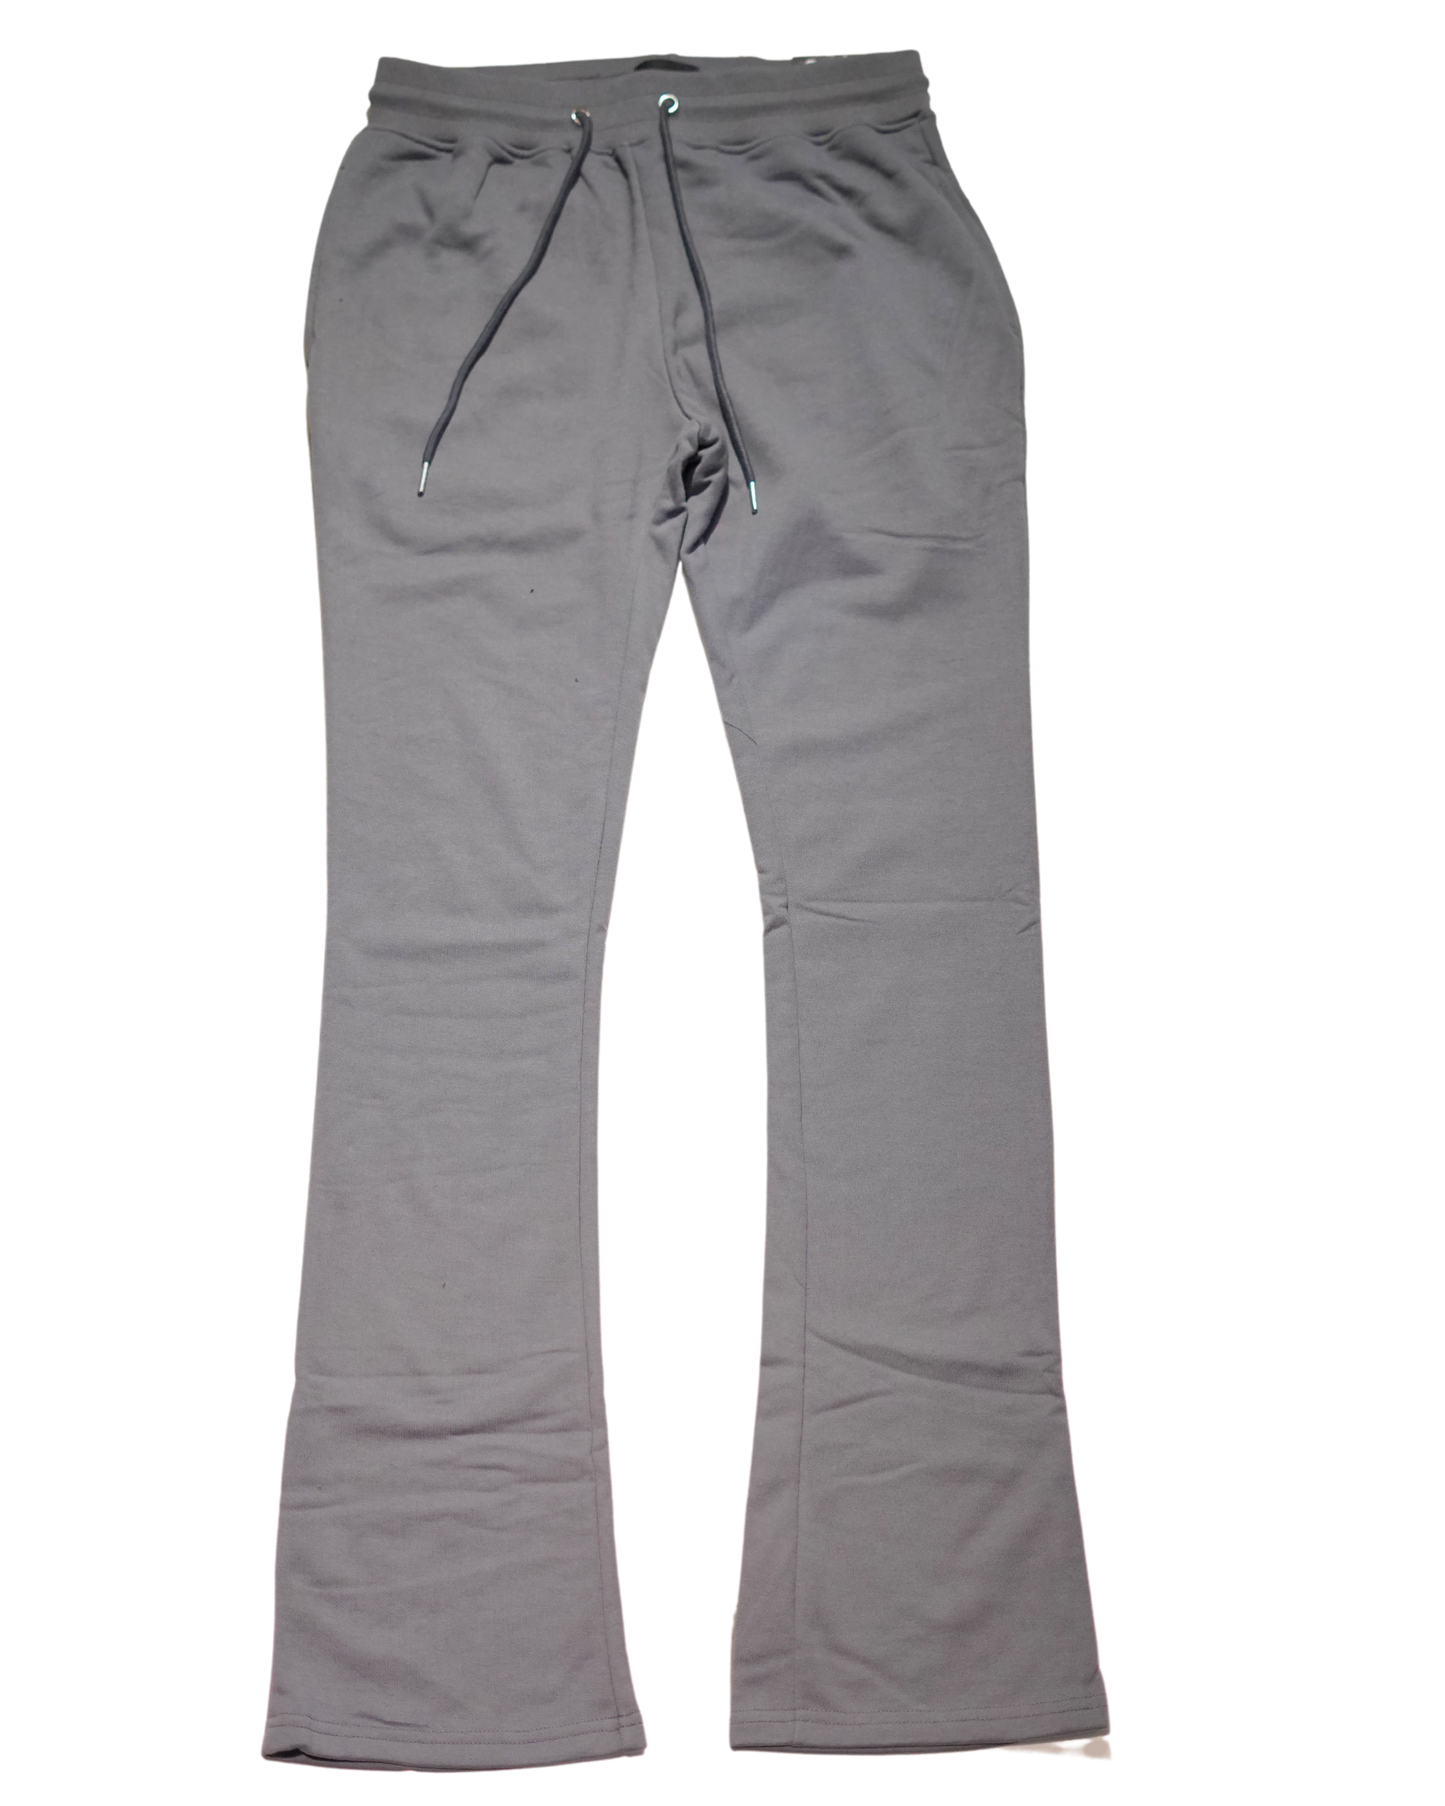 Stacked Sweatpants 5690